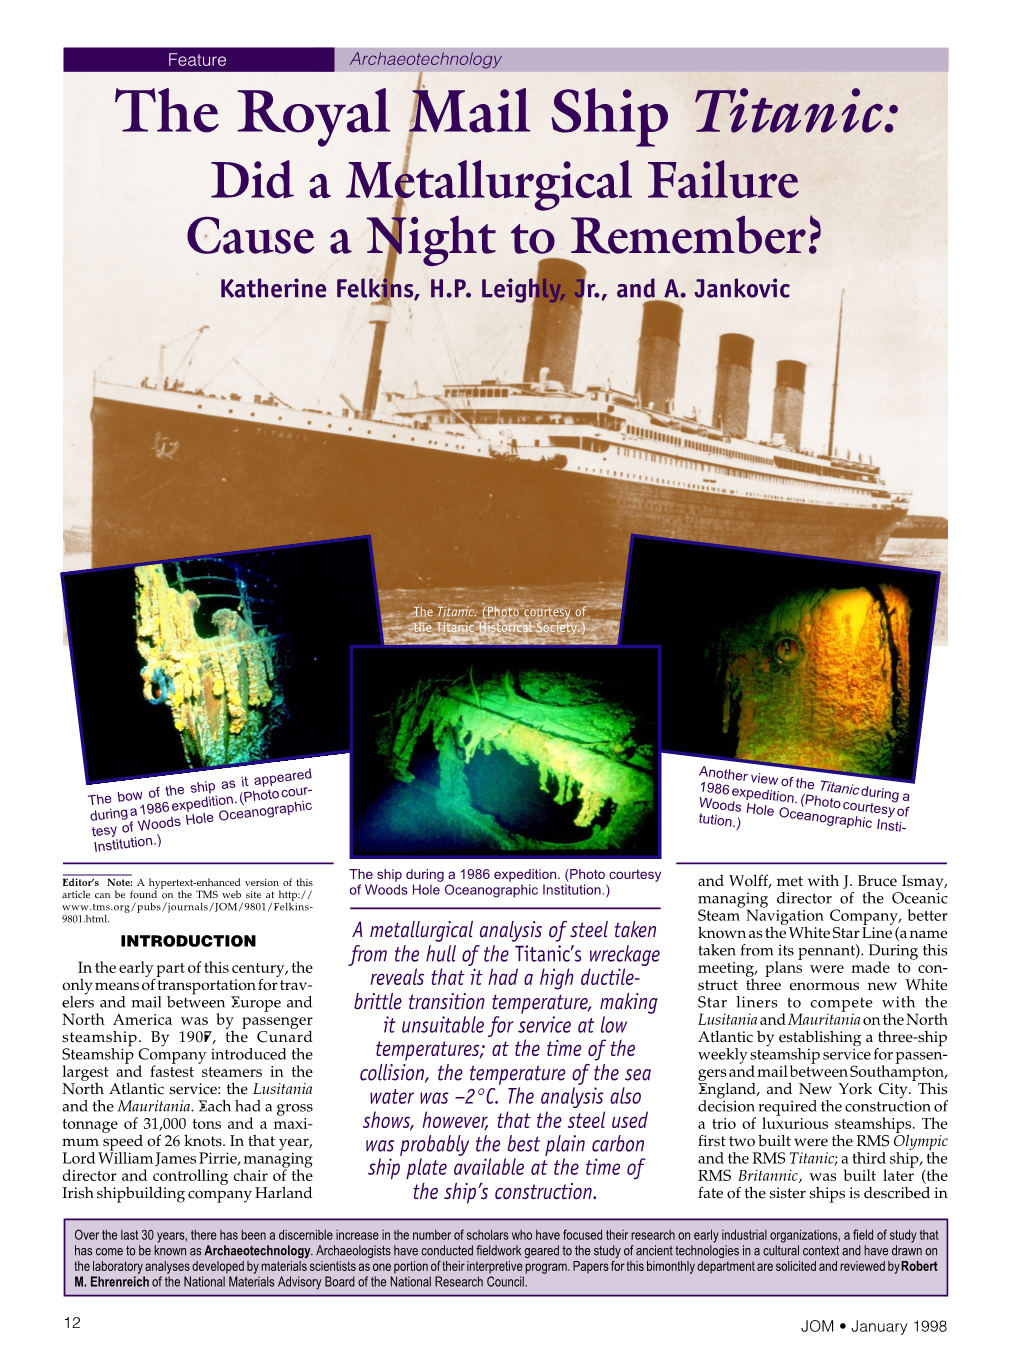 The Royal Mail Ship Titanic: Did a Metallurgical Failure Cause a Night to Remember? Katherine Felkins, H.P